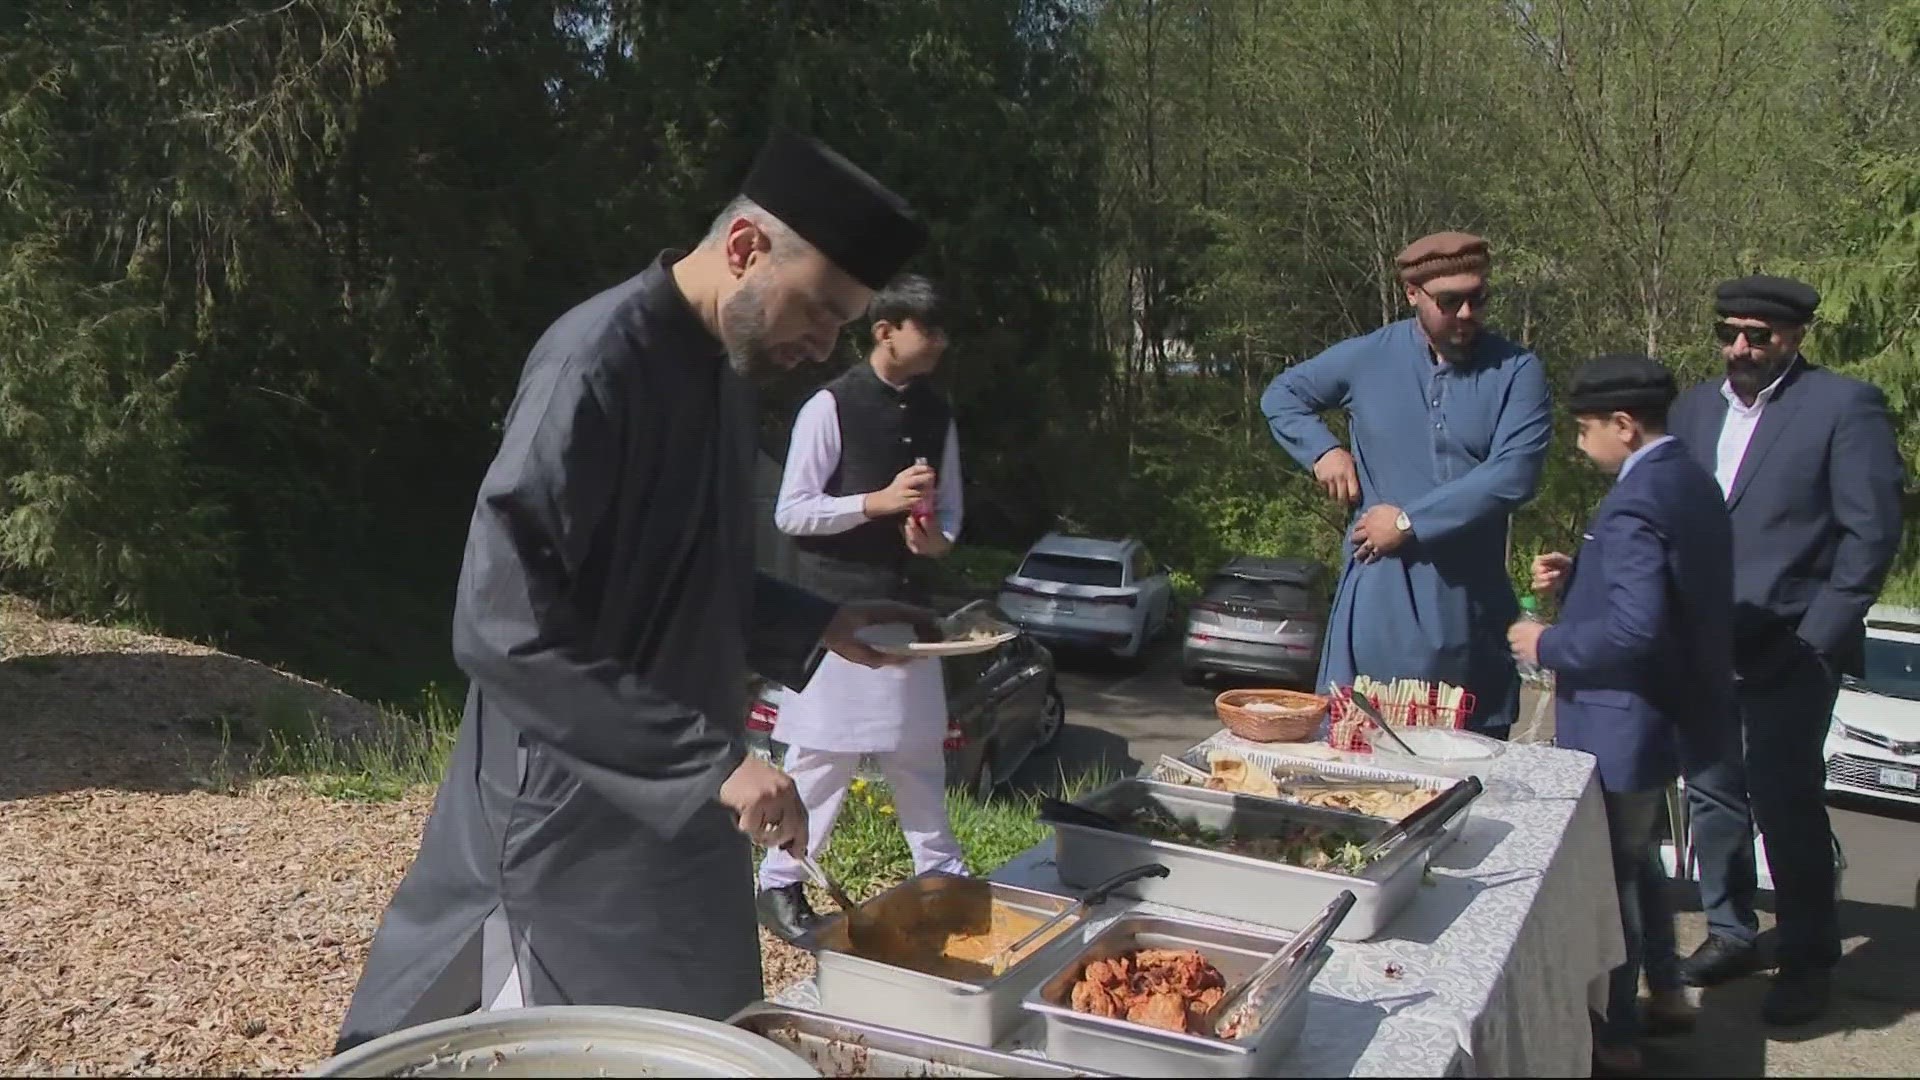 As Ramadan comes to a close, Muslims around the world are celebrating "Eid-Al-Fitr" which means "Festival of Breaking Fast."